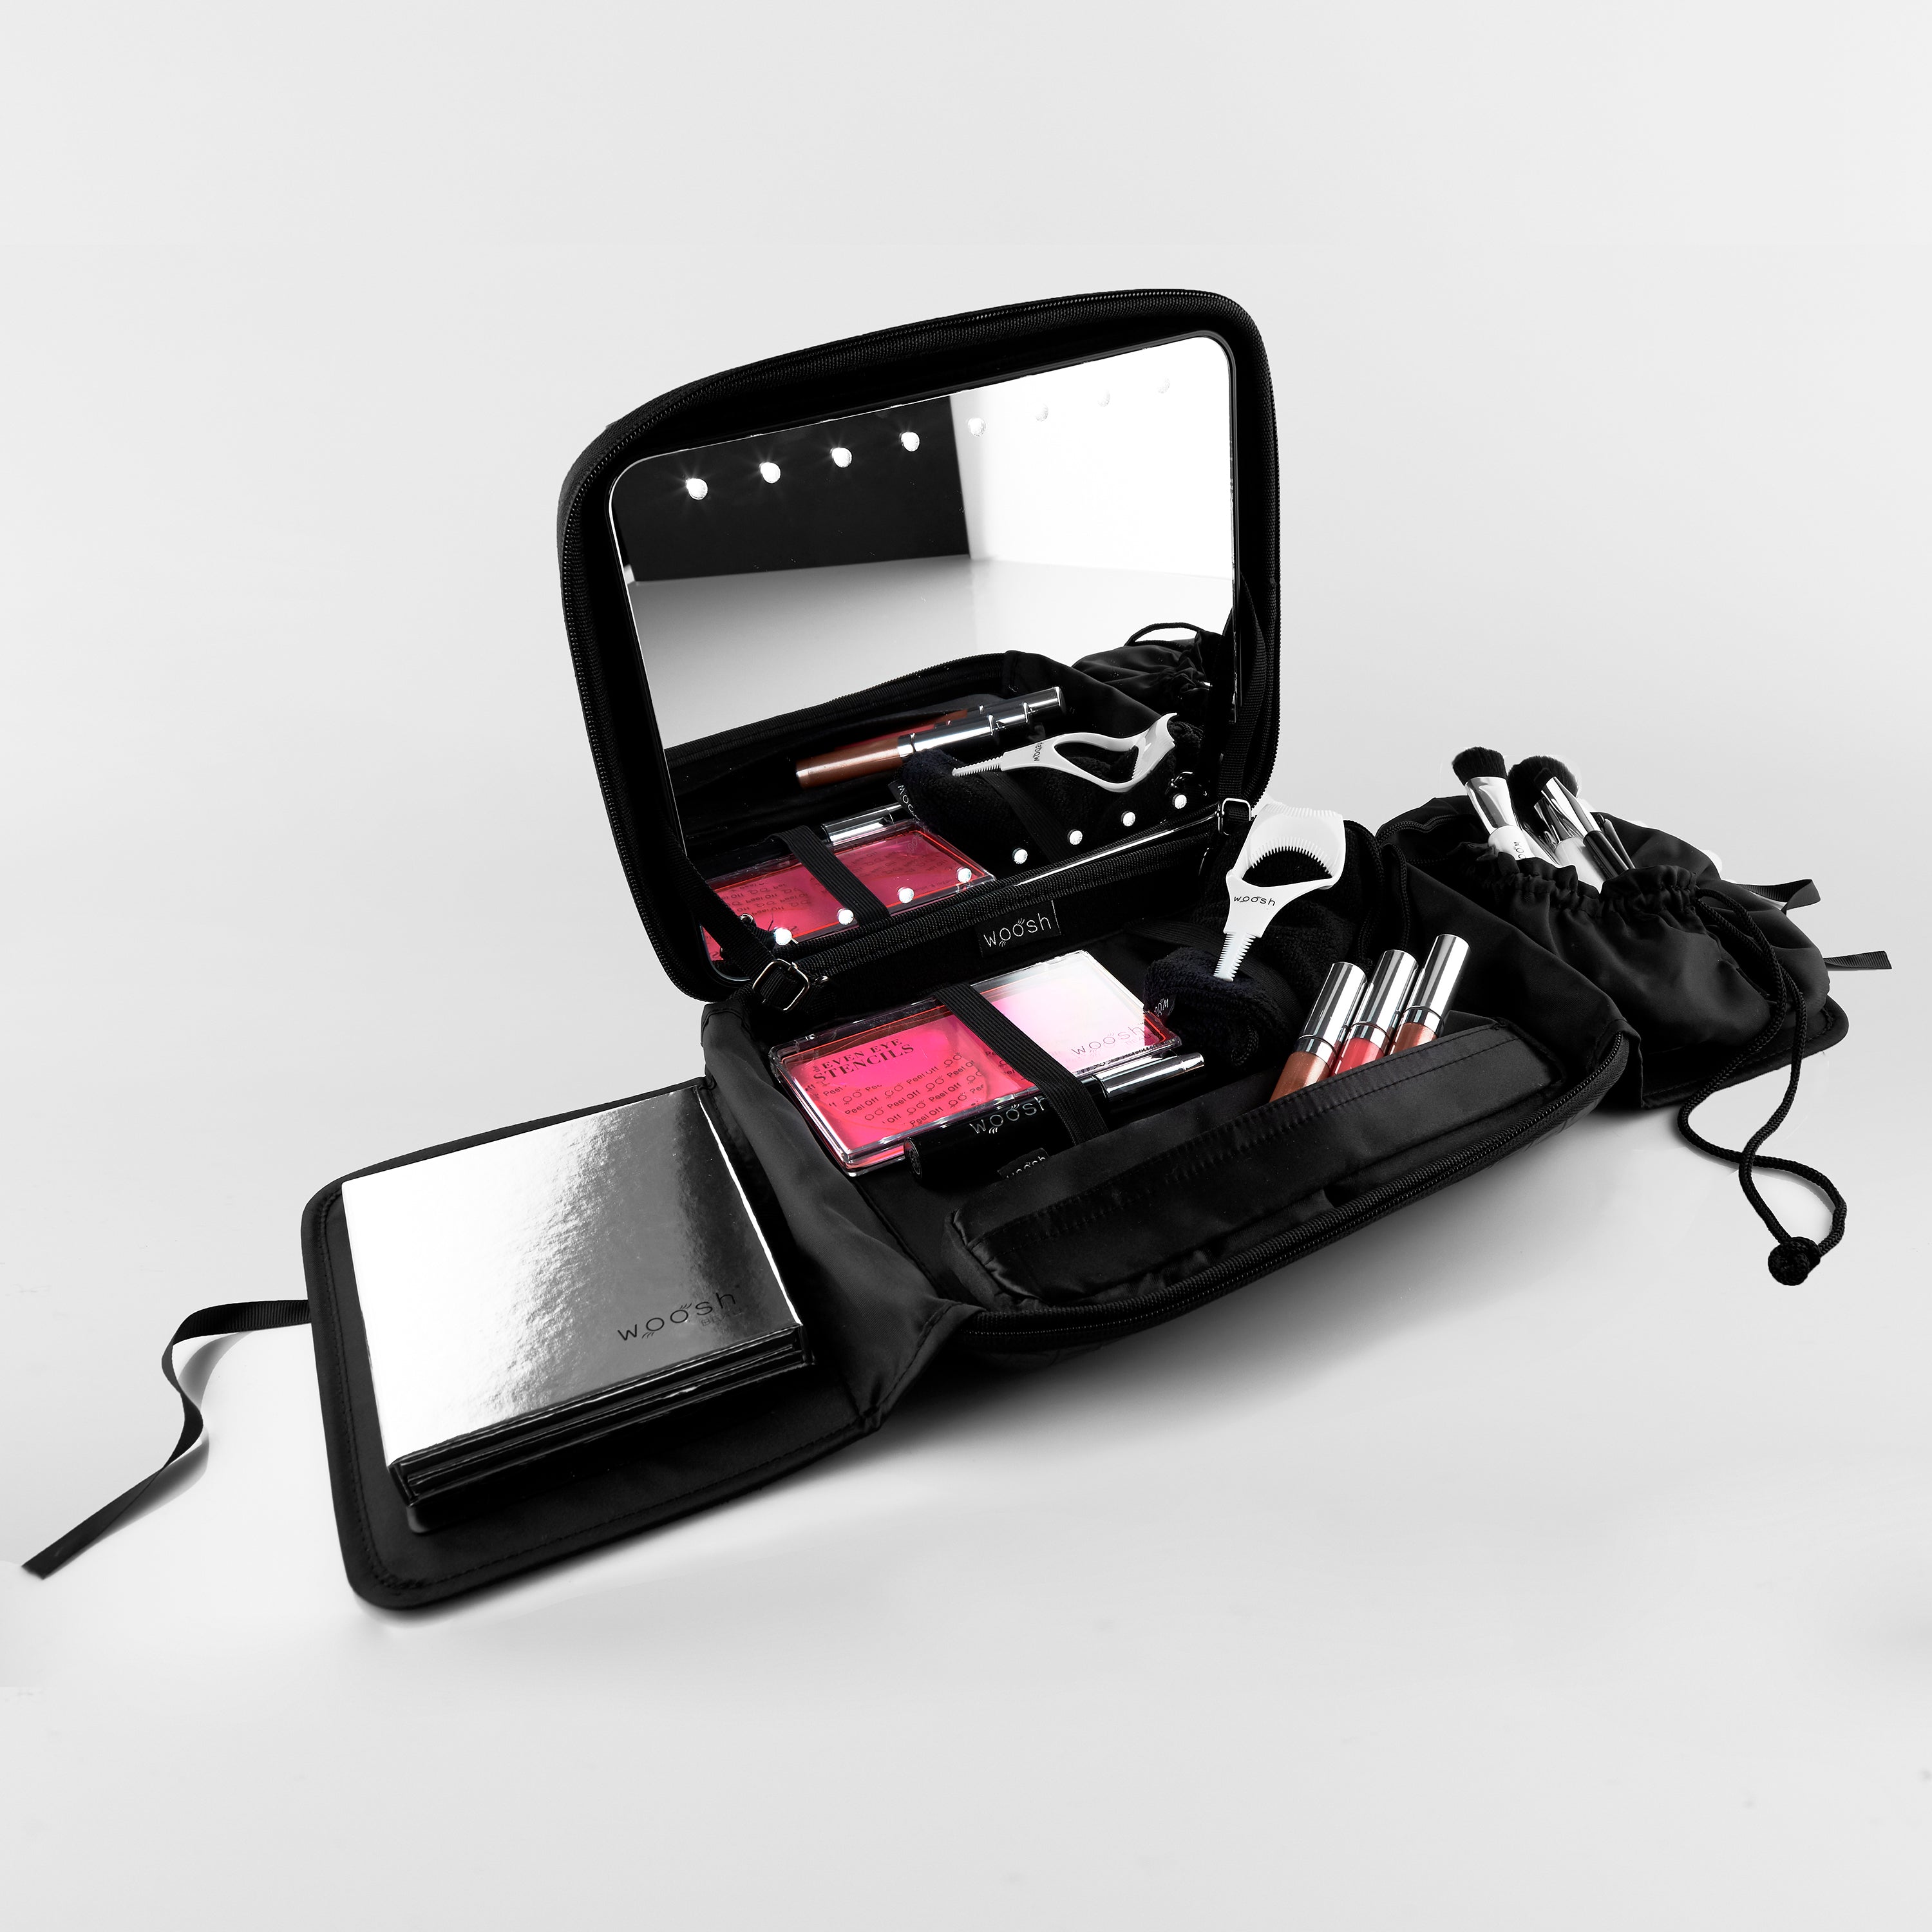 MMS Mobile Makeup System Bag opened that holds a mirror, the Fold Out Face Palette, Three Spin-On lip glosses, 4 essential makeup brushes and more!